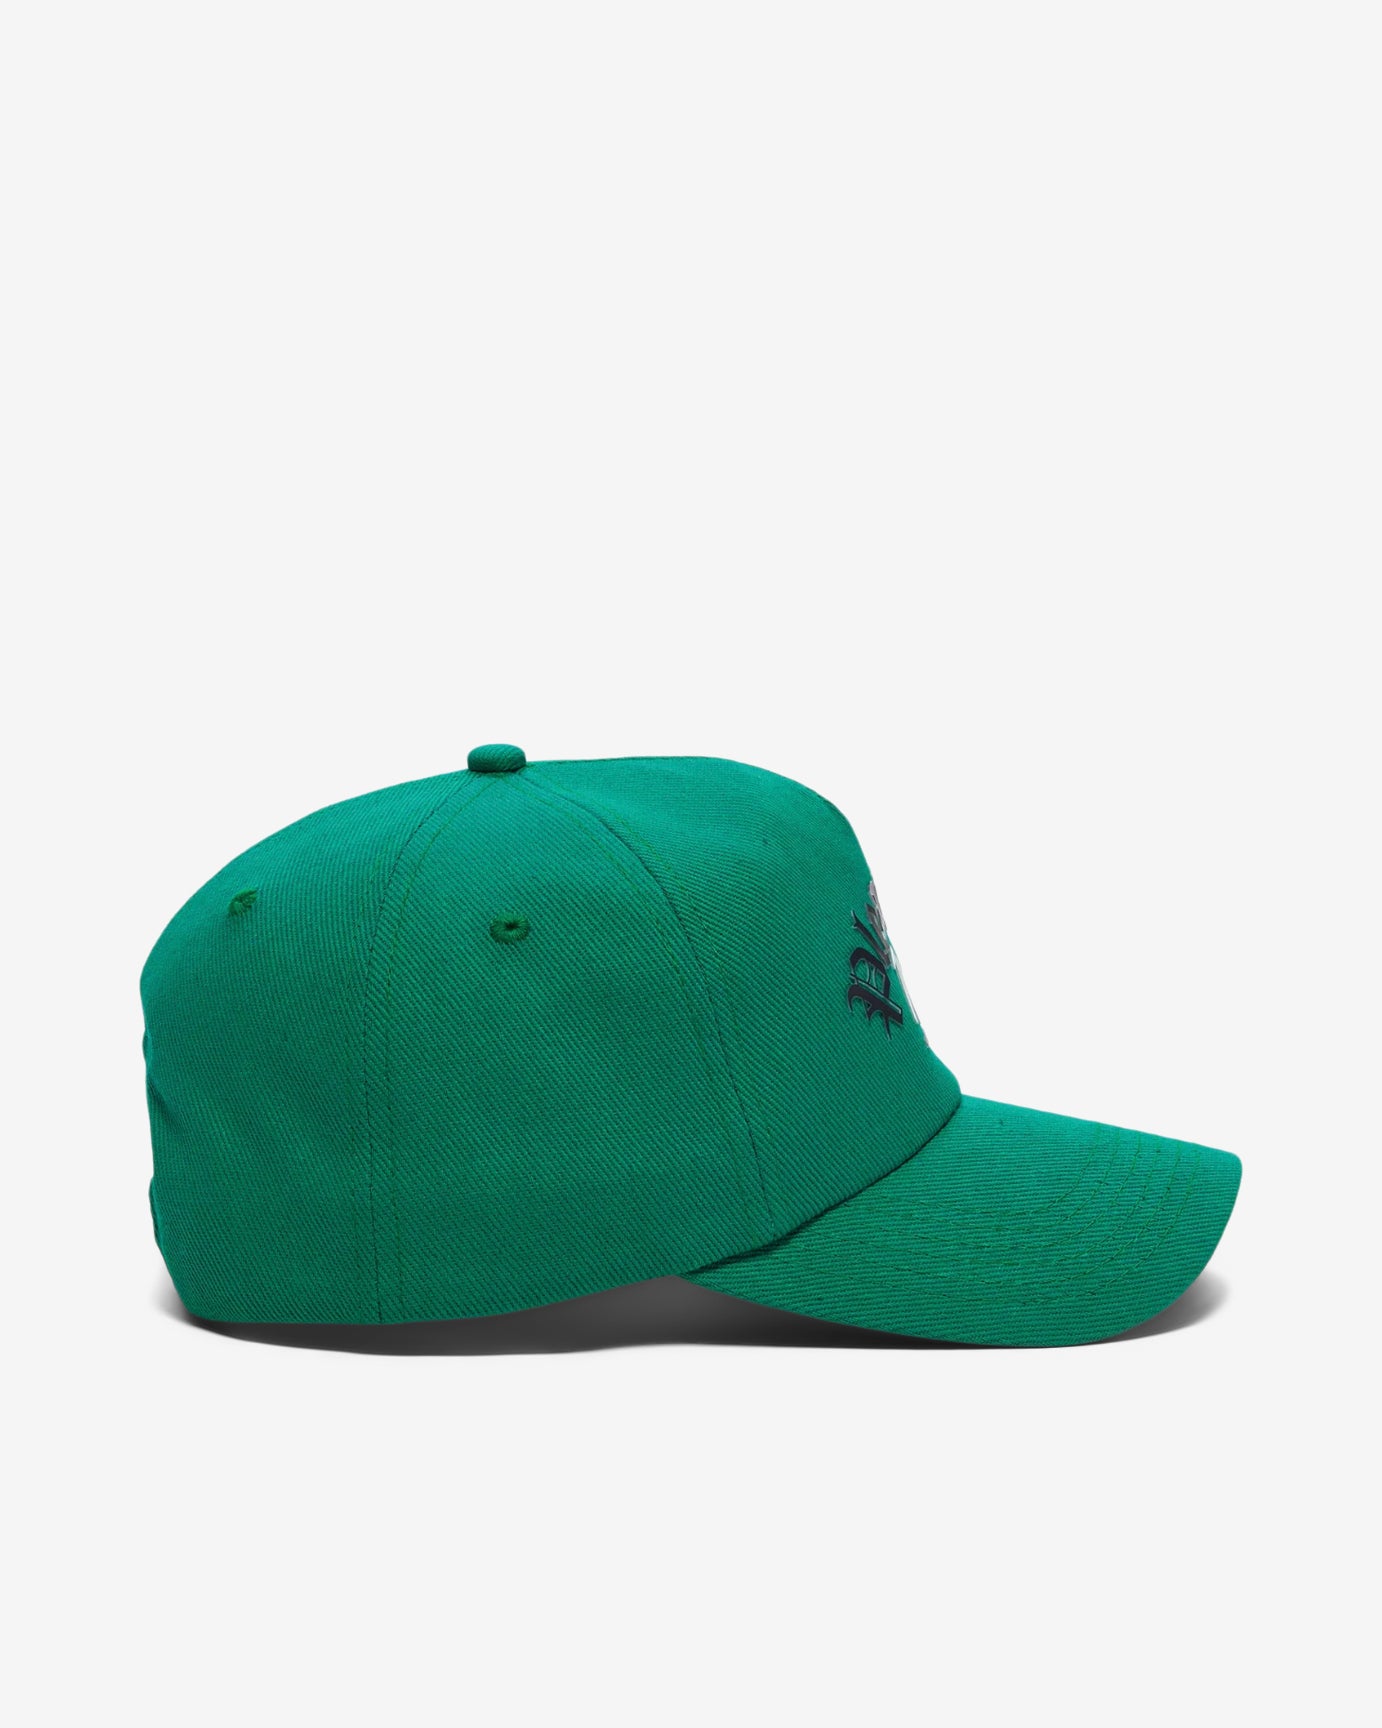 APPOINTMENT UNCONSTRUCTED SNAPBACK - GREEN